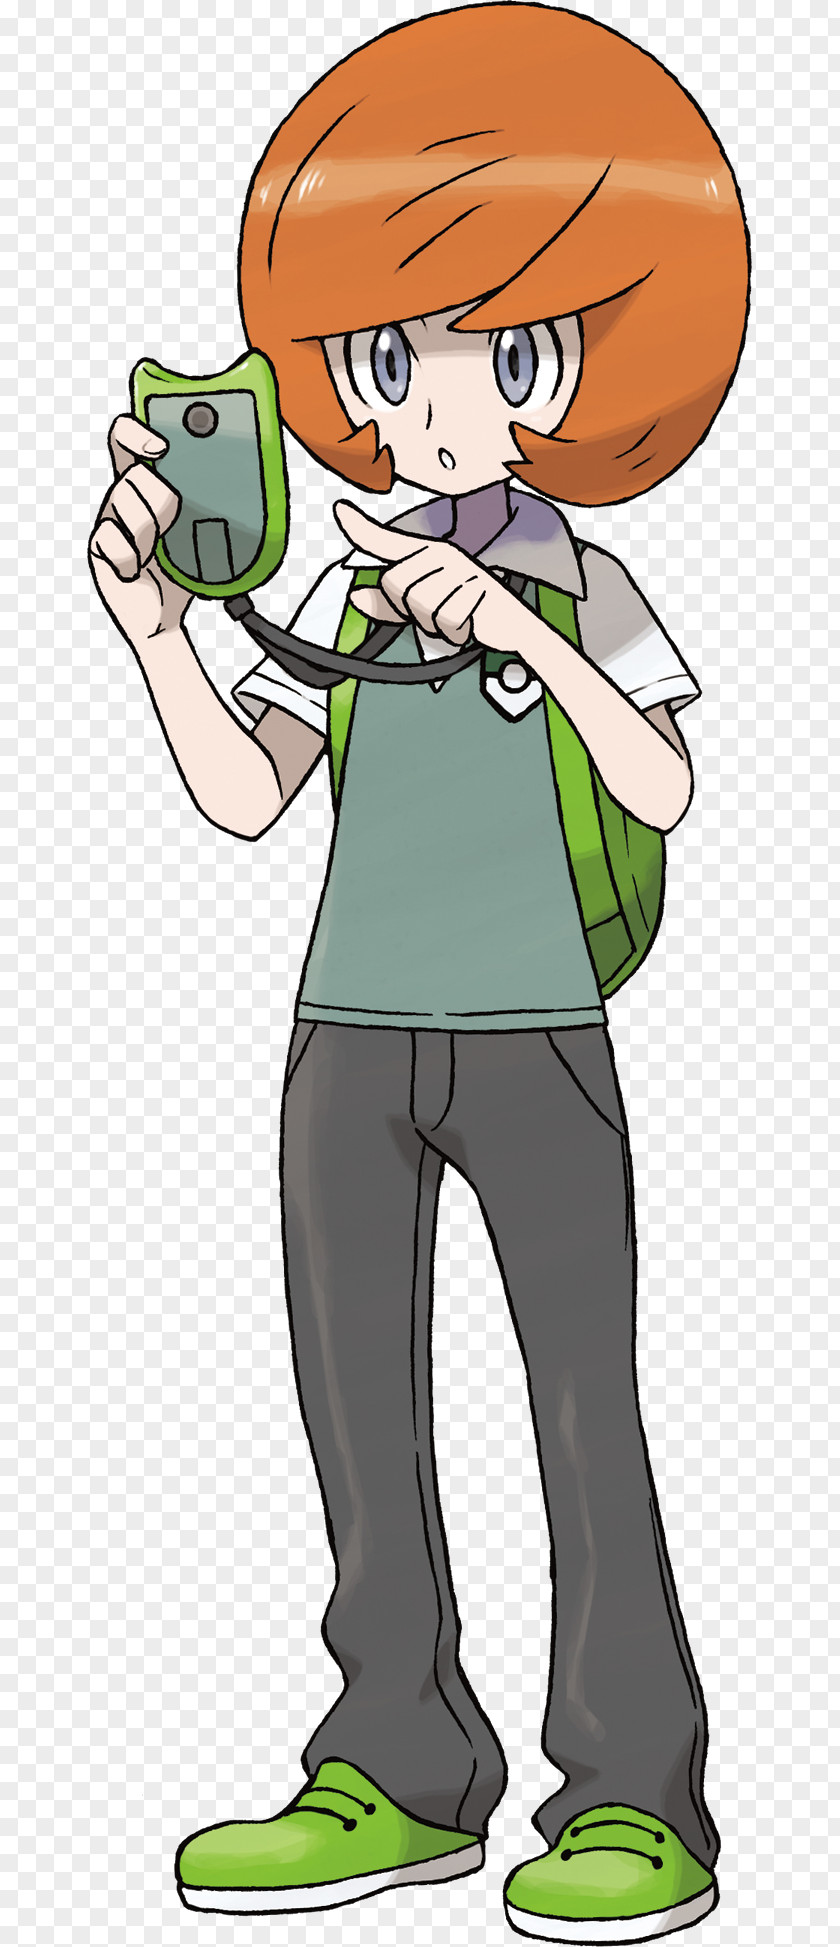 Pokemon Go Pokémon X And Y GO Video Game Character PNG